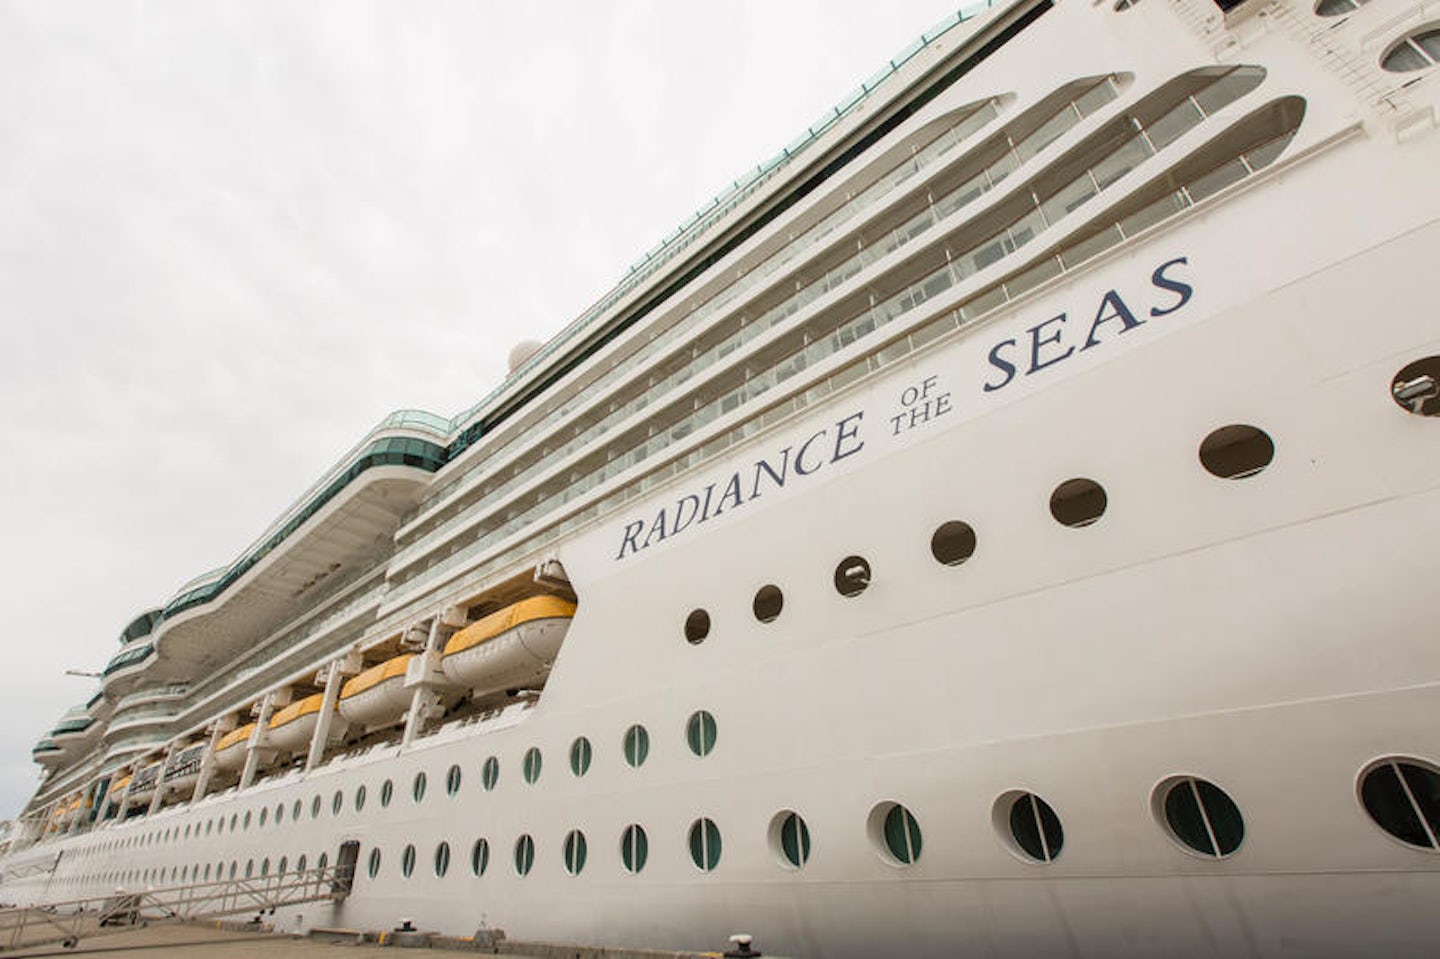 Ship Exterior on Radiance of the Seas